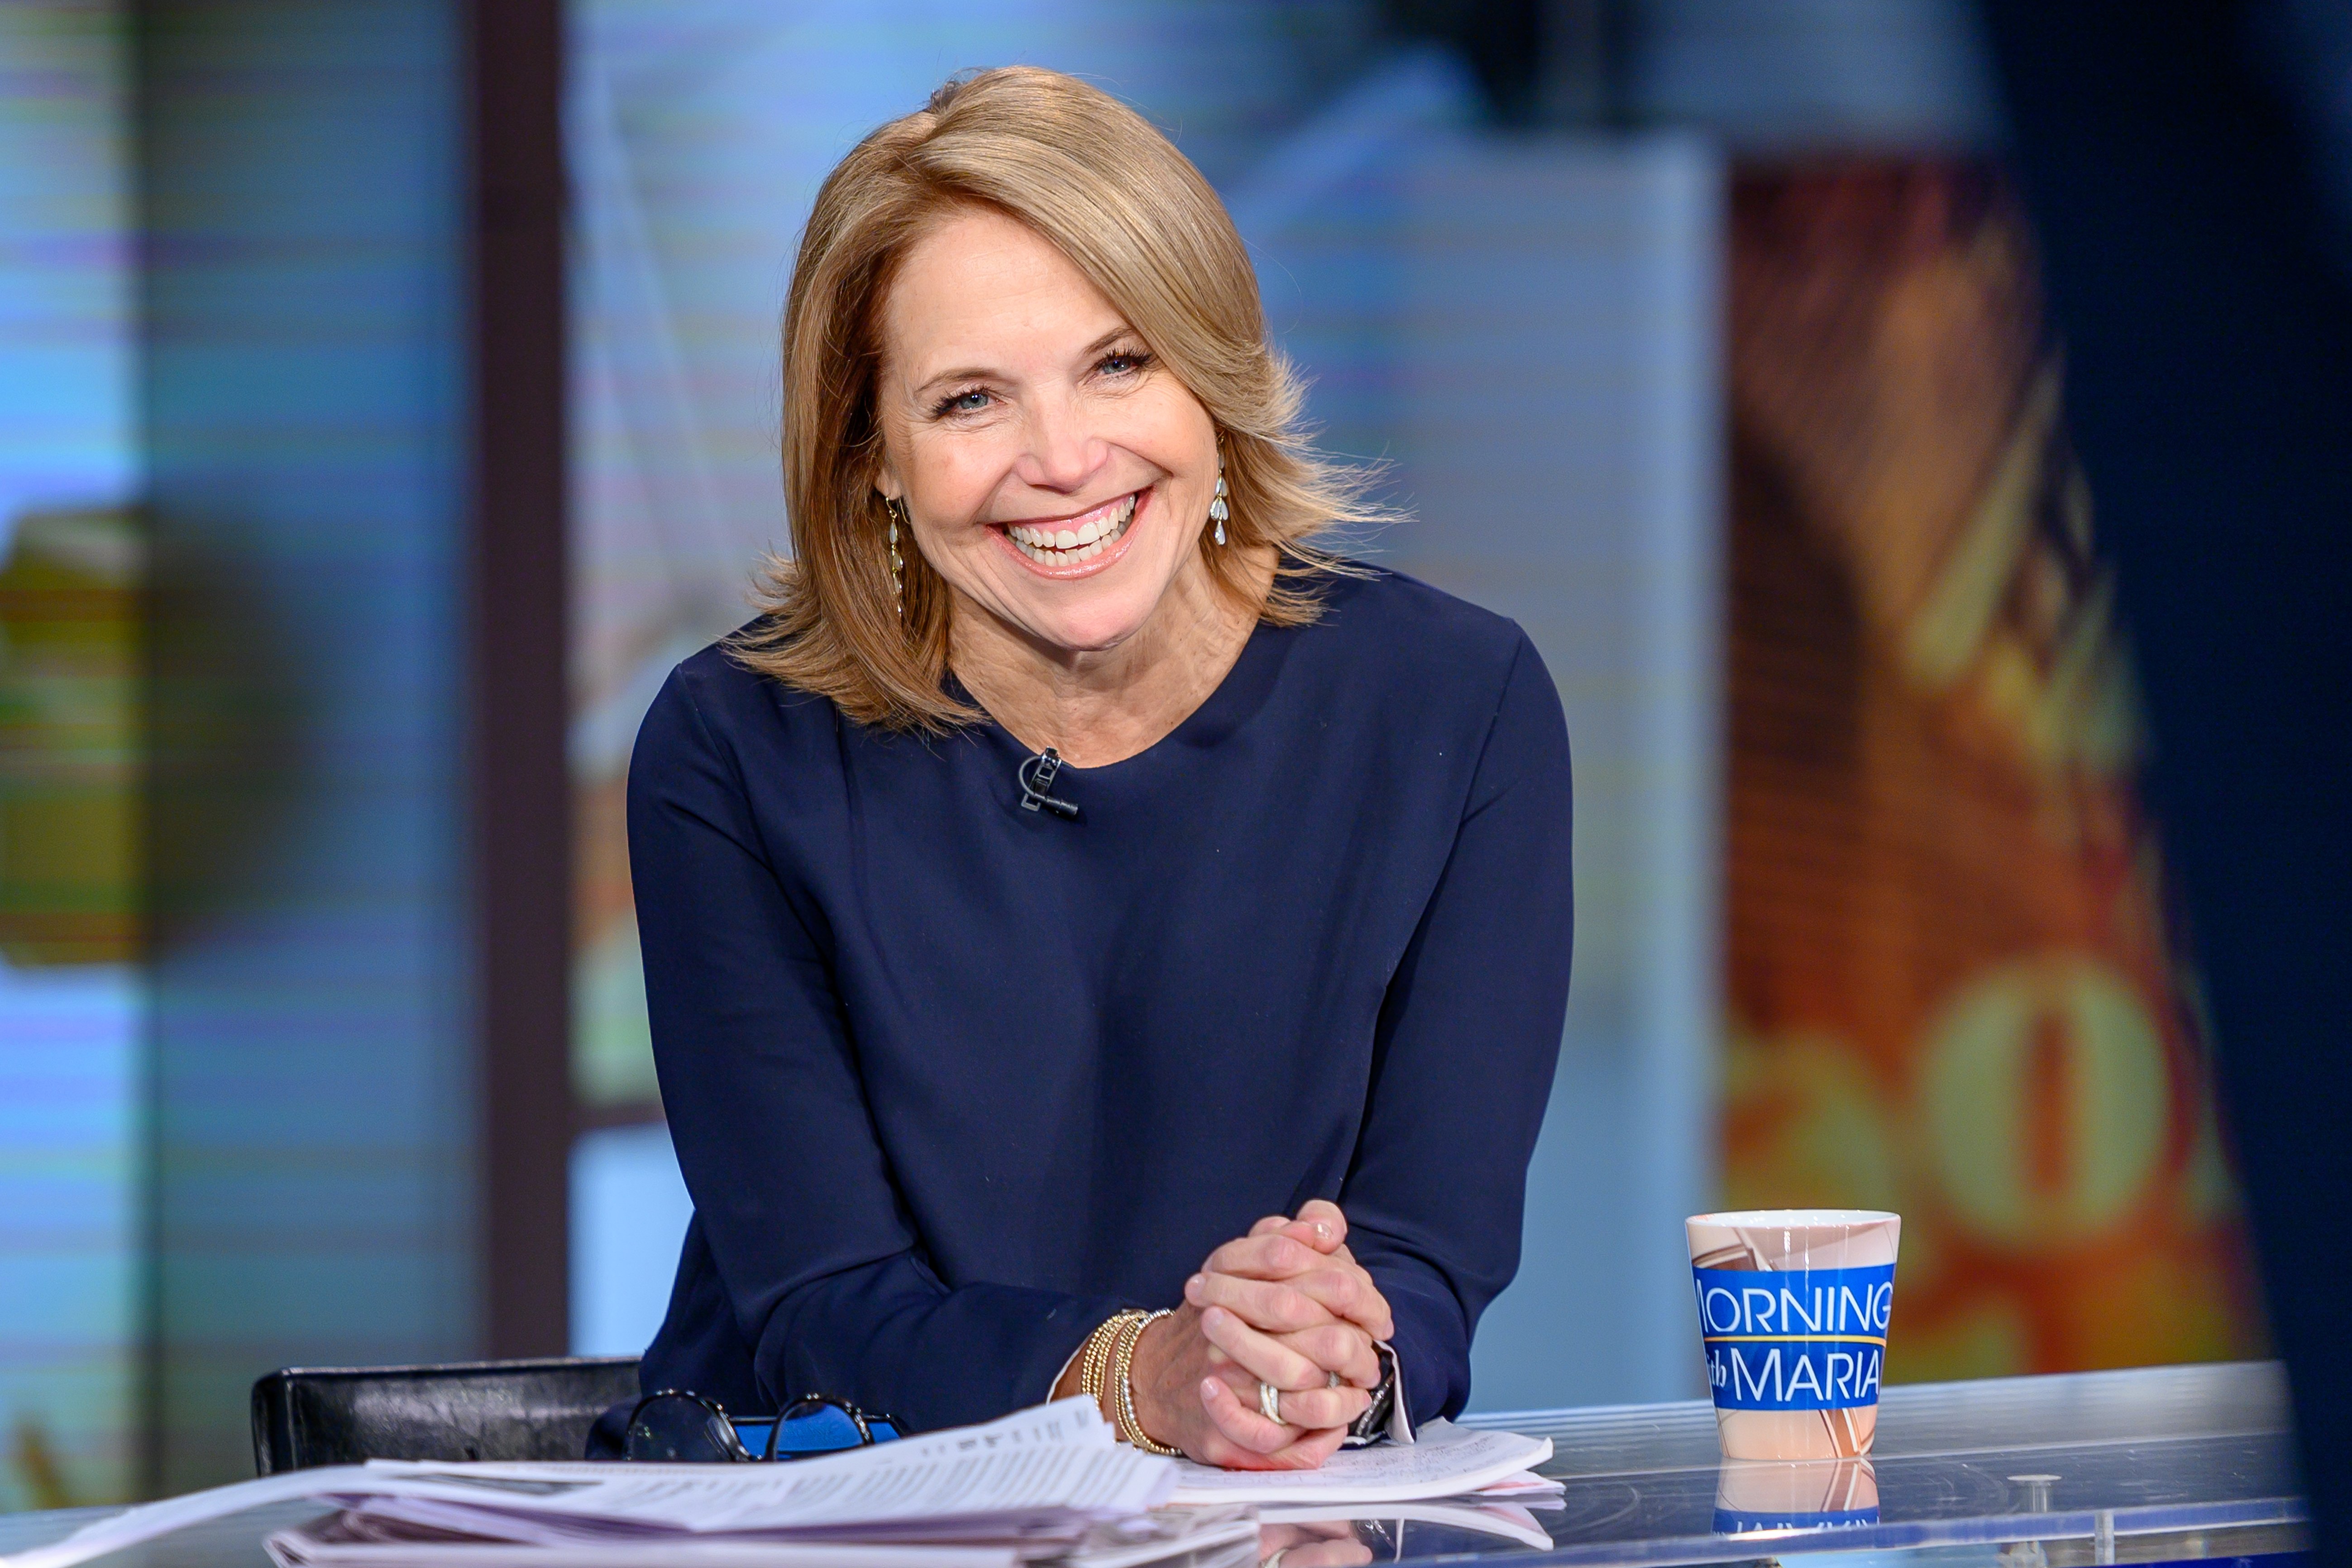 Katie Couric visits "Mornings With Maria" at Fox Business Network Studios on March 20, 2019 in New York City | Photo: Getty Images